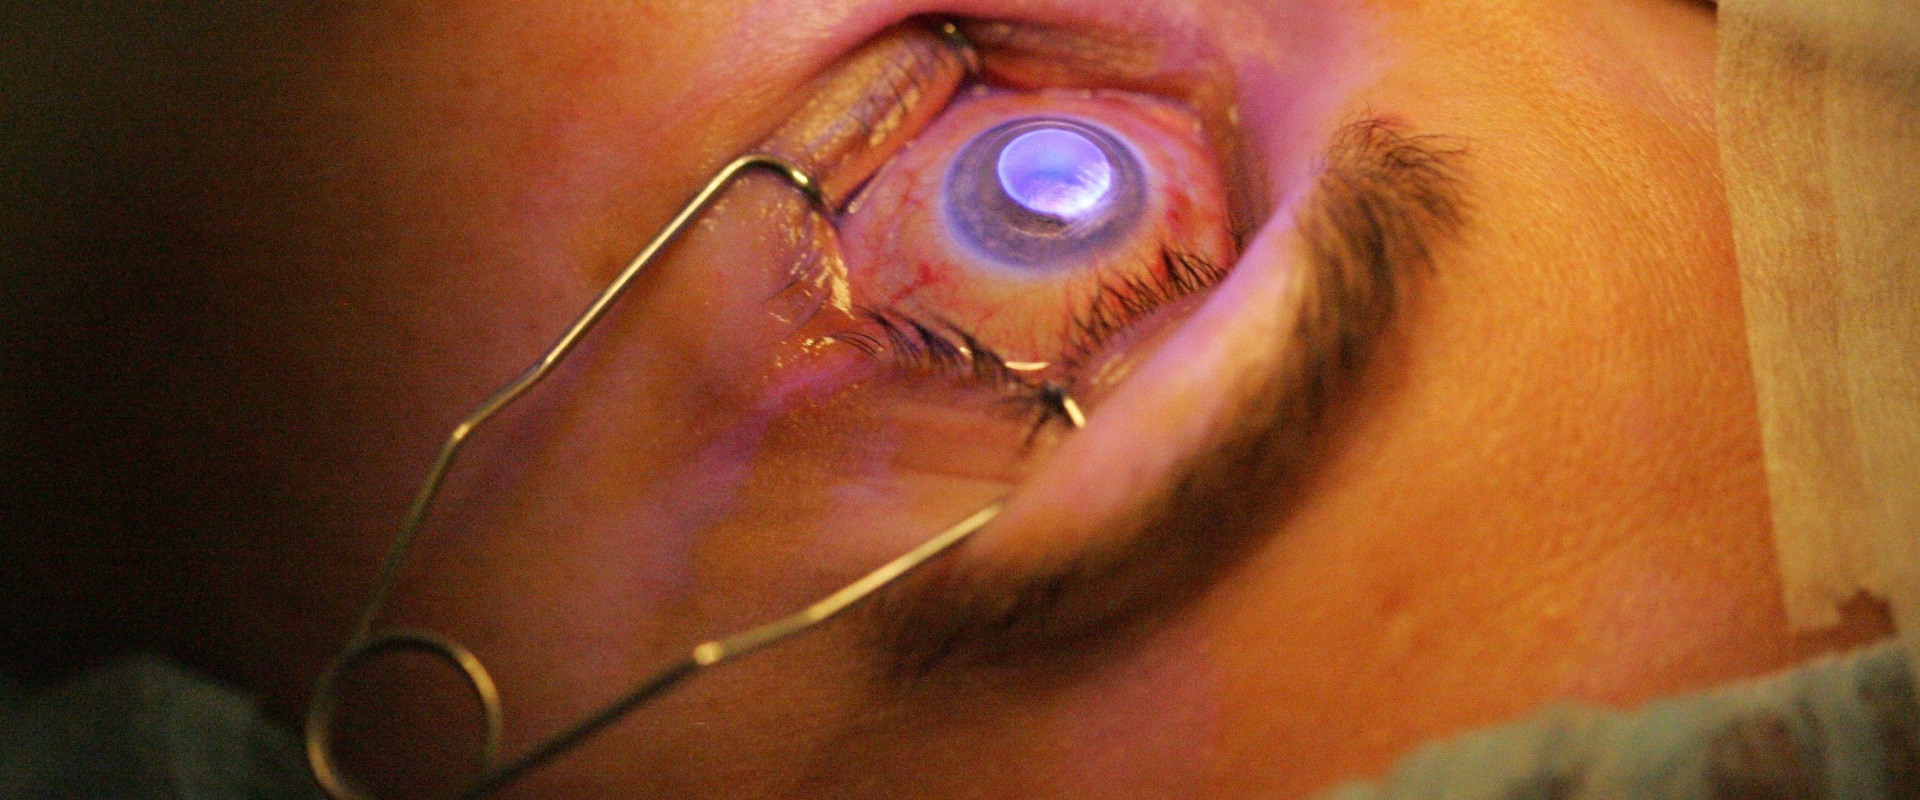 Is LASIK Surgery Right for You?